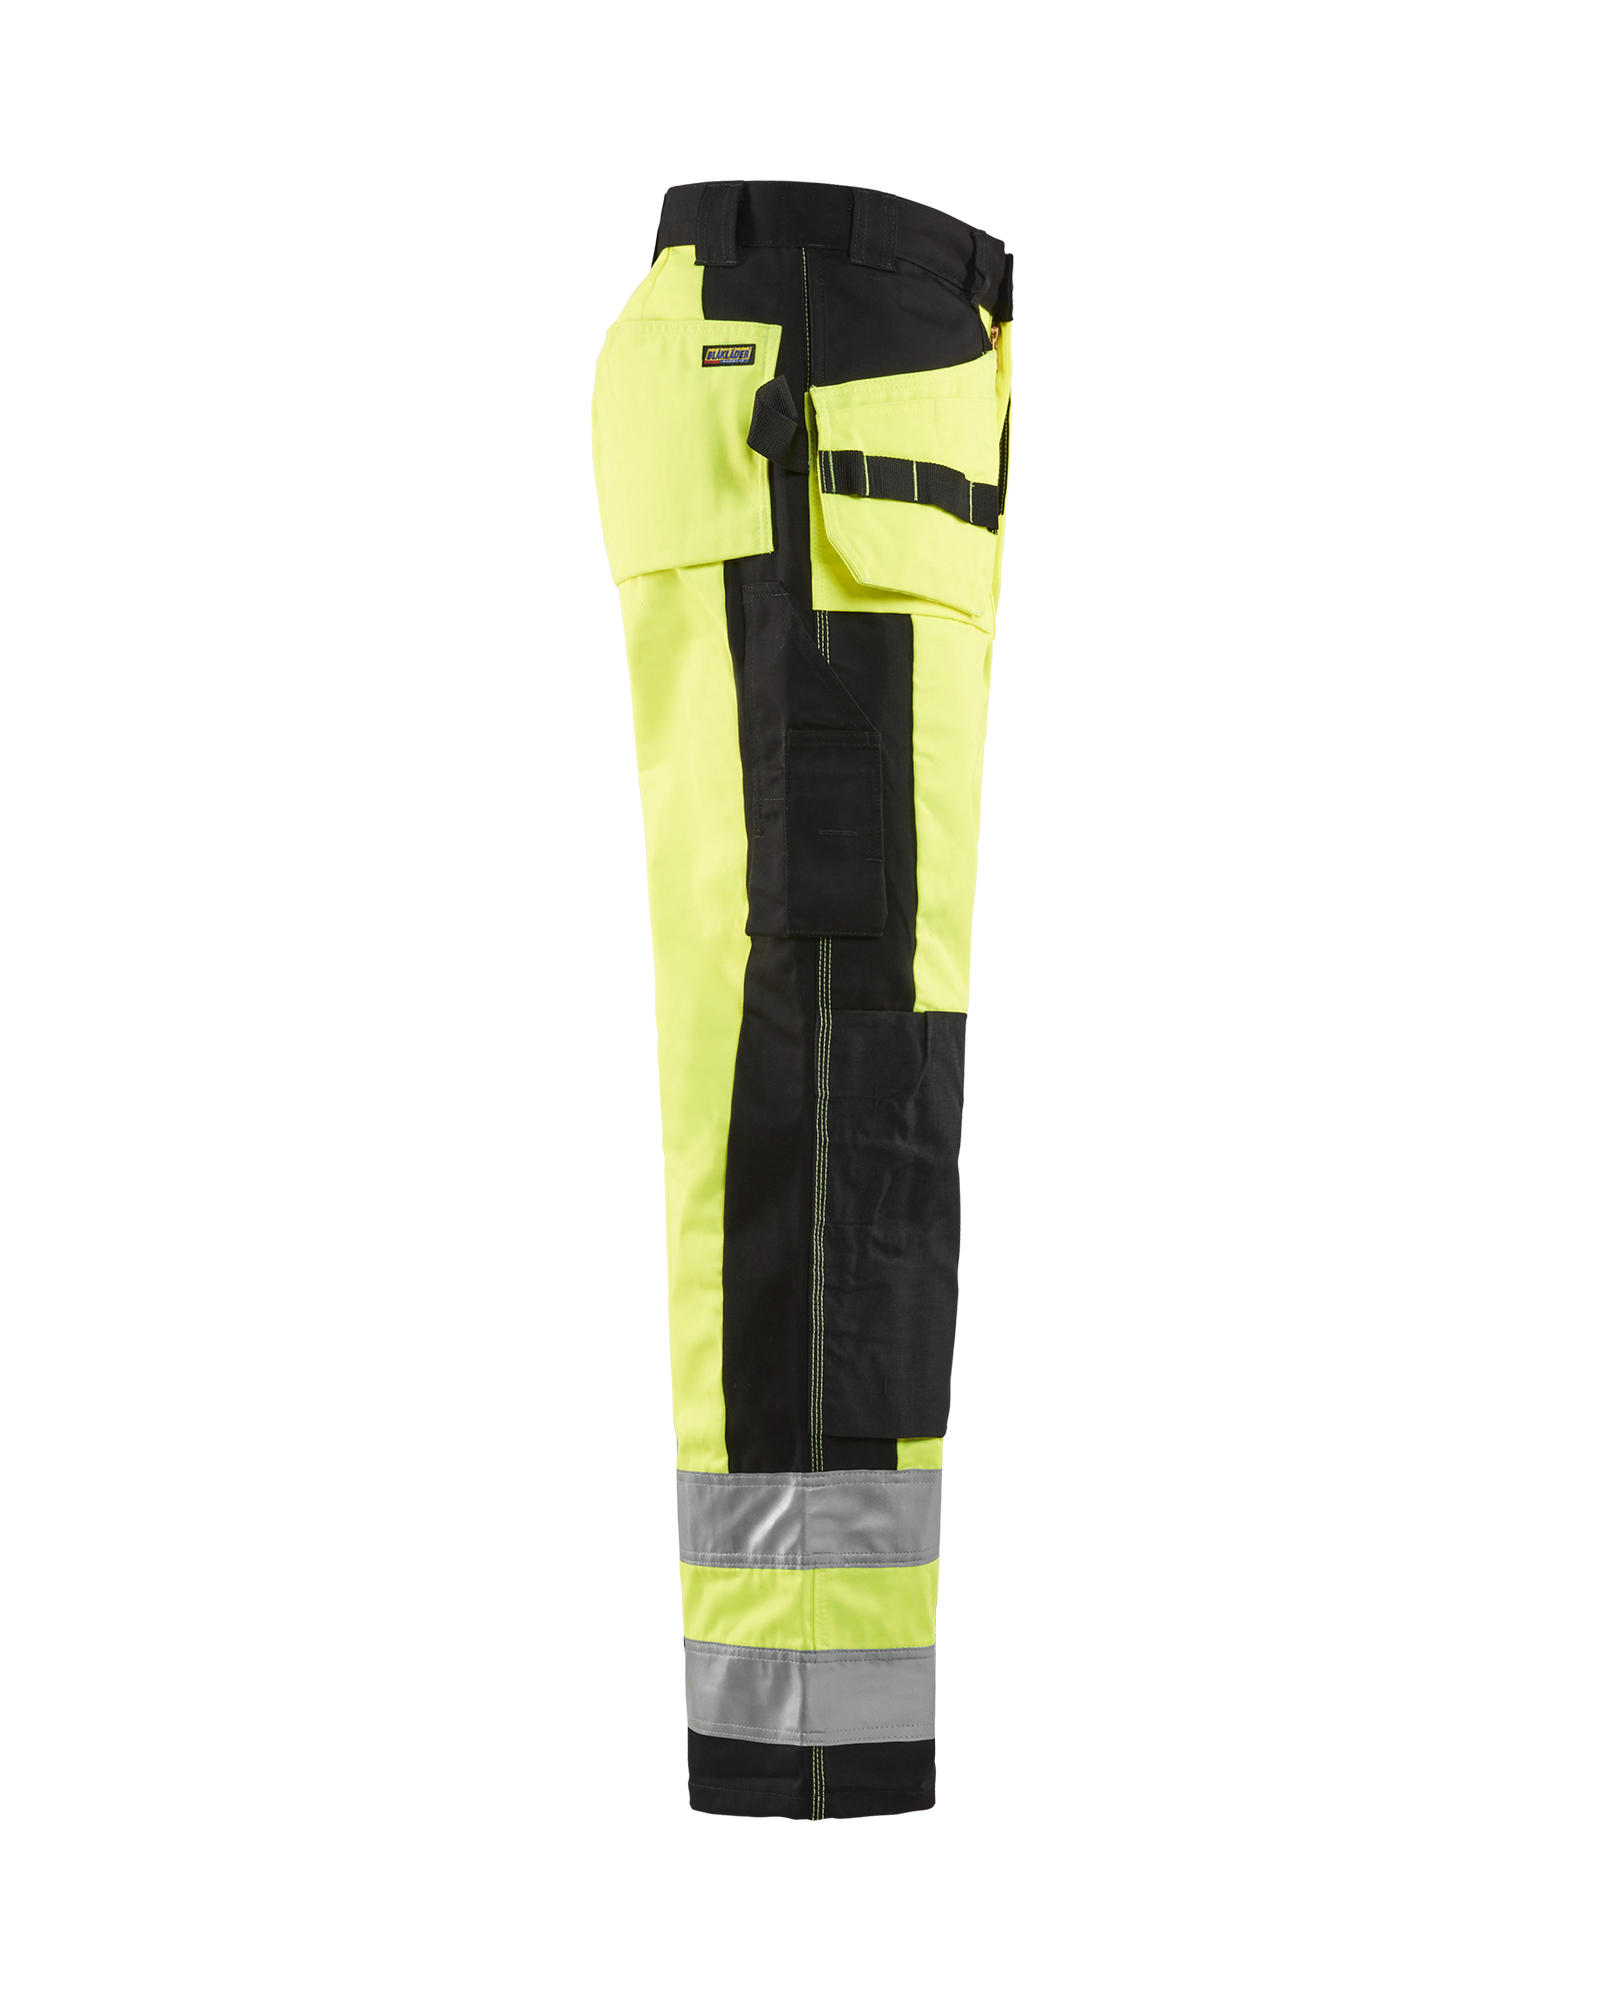 Blaklader Knee Pad Work Trousers 300gm Multi Colour Choices  1523 Trouser  ActiveWorkwear